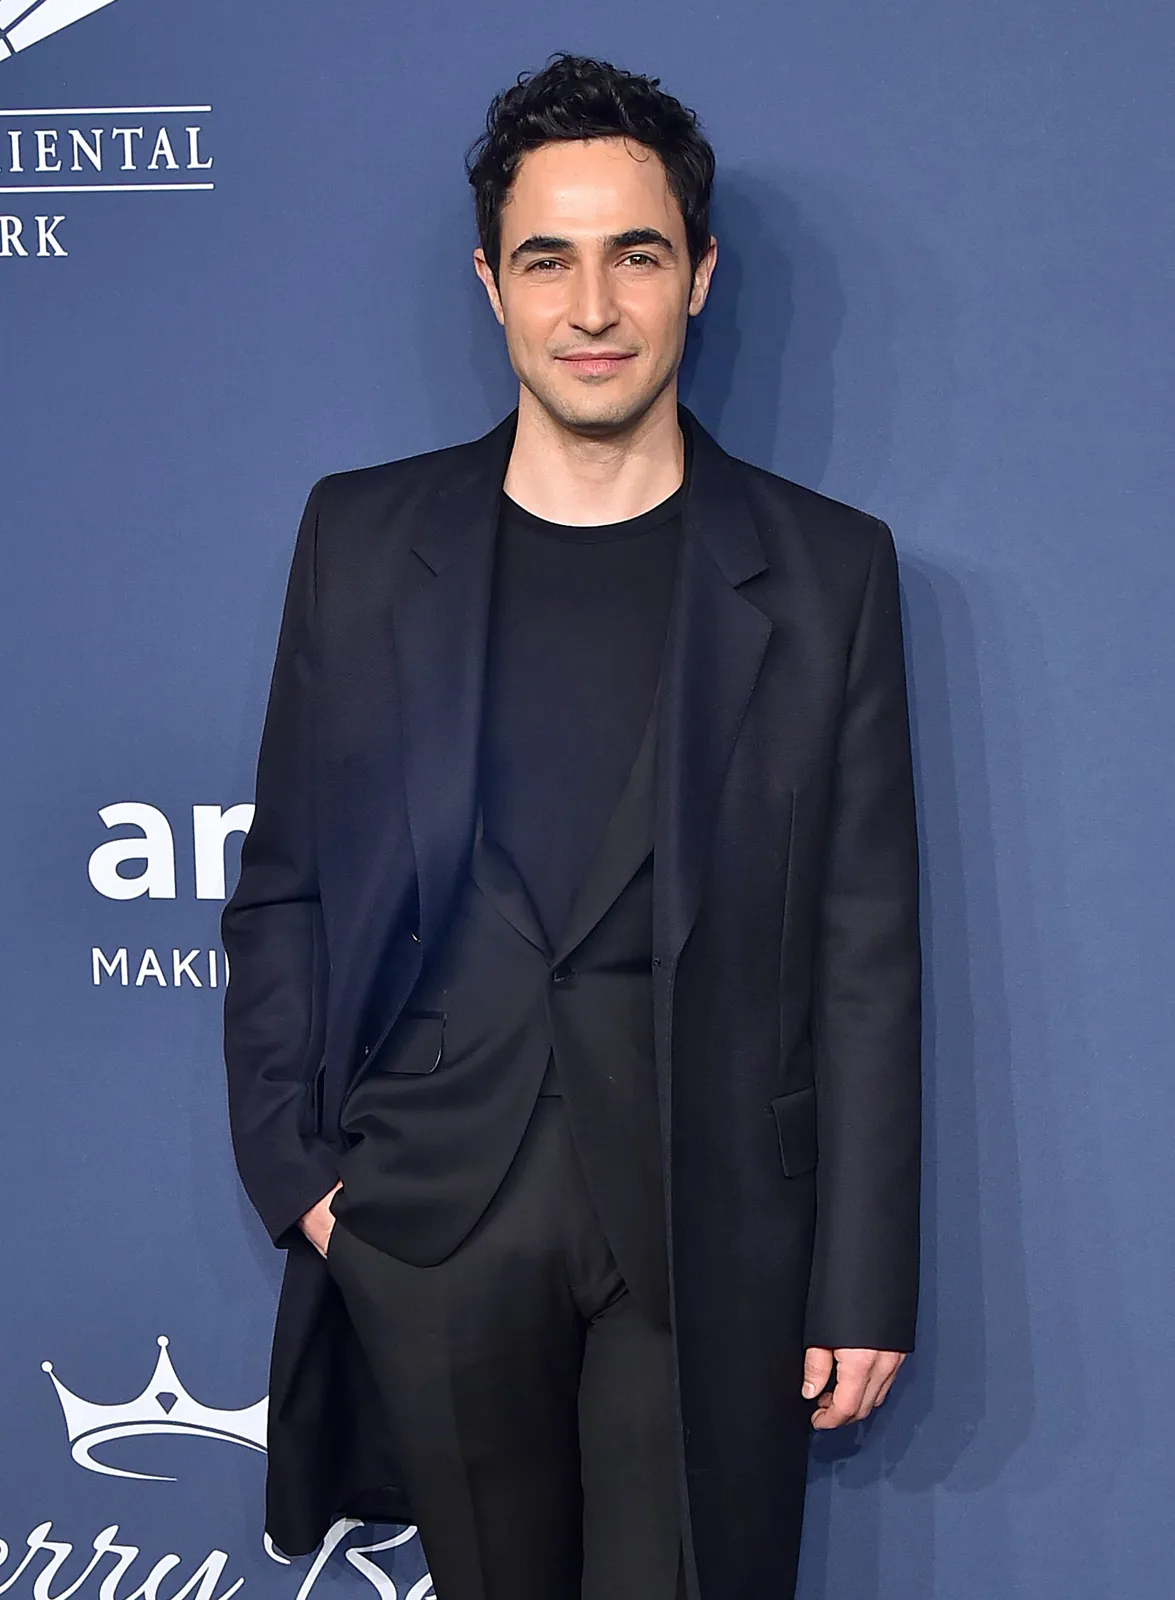 Fashion designer Zac Posen appointed as the new Creative Director of Gap